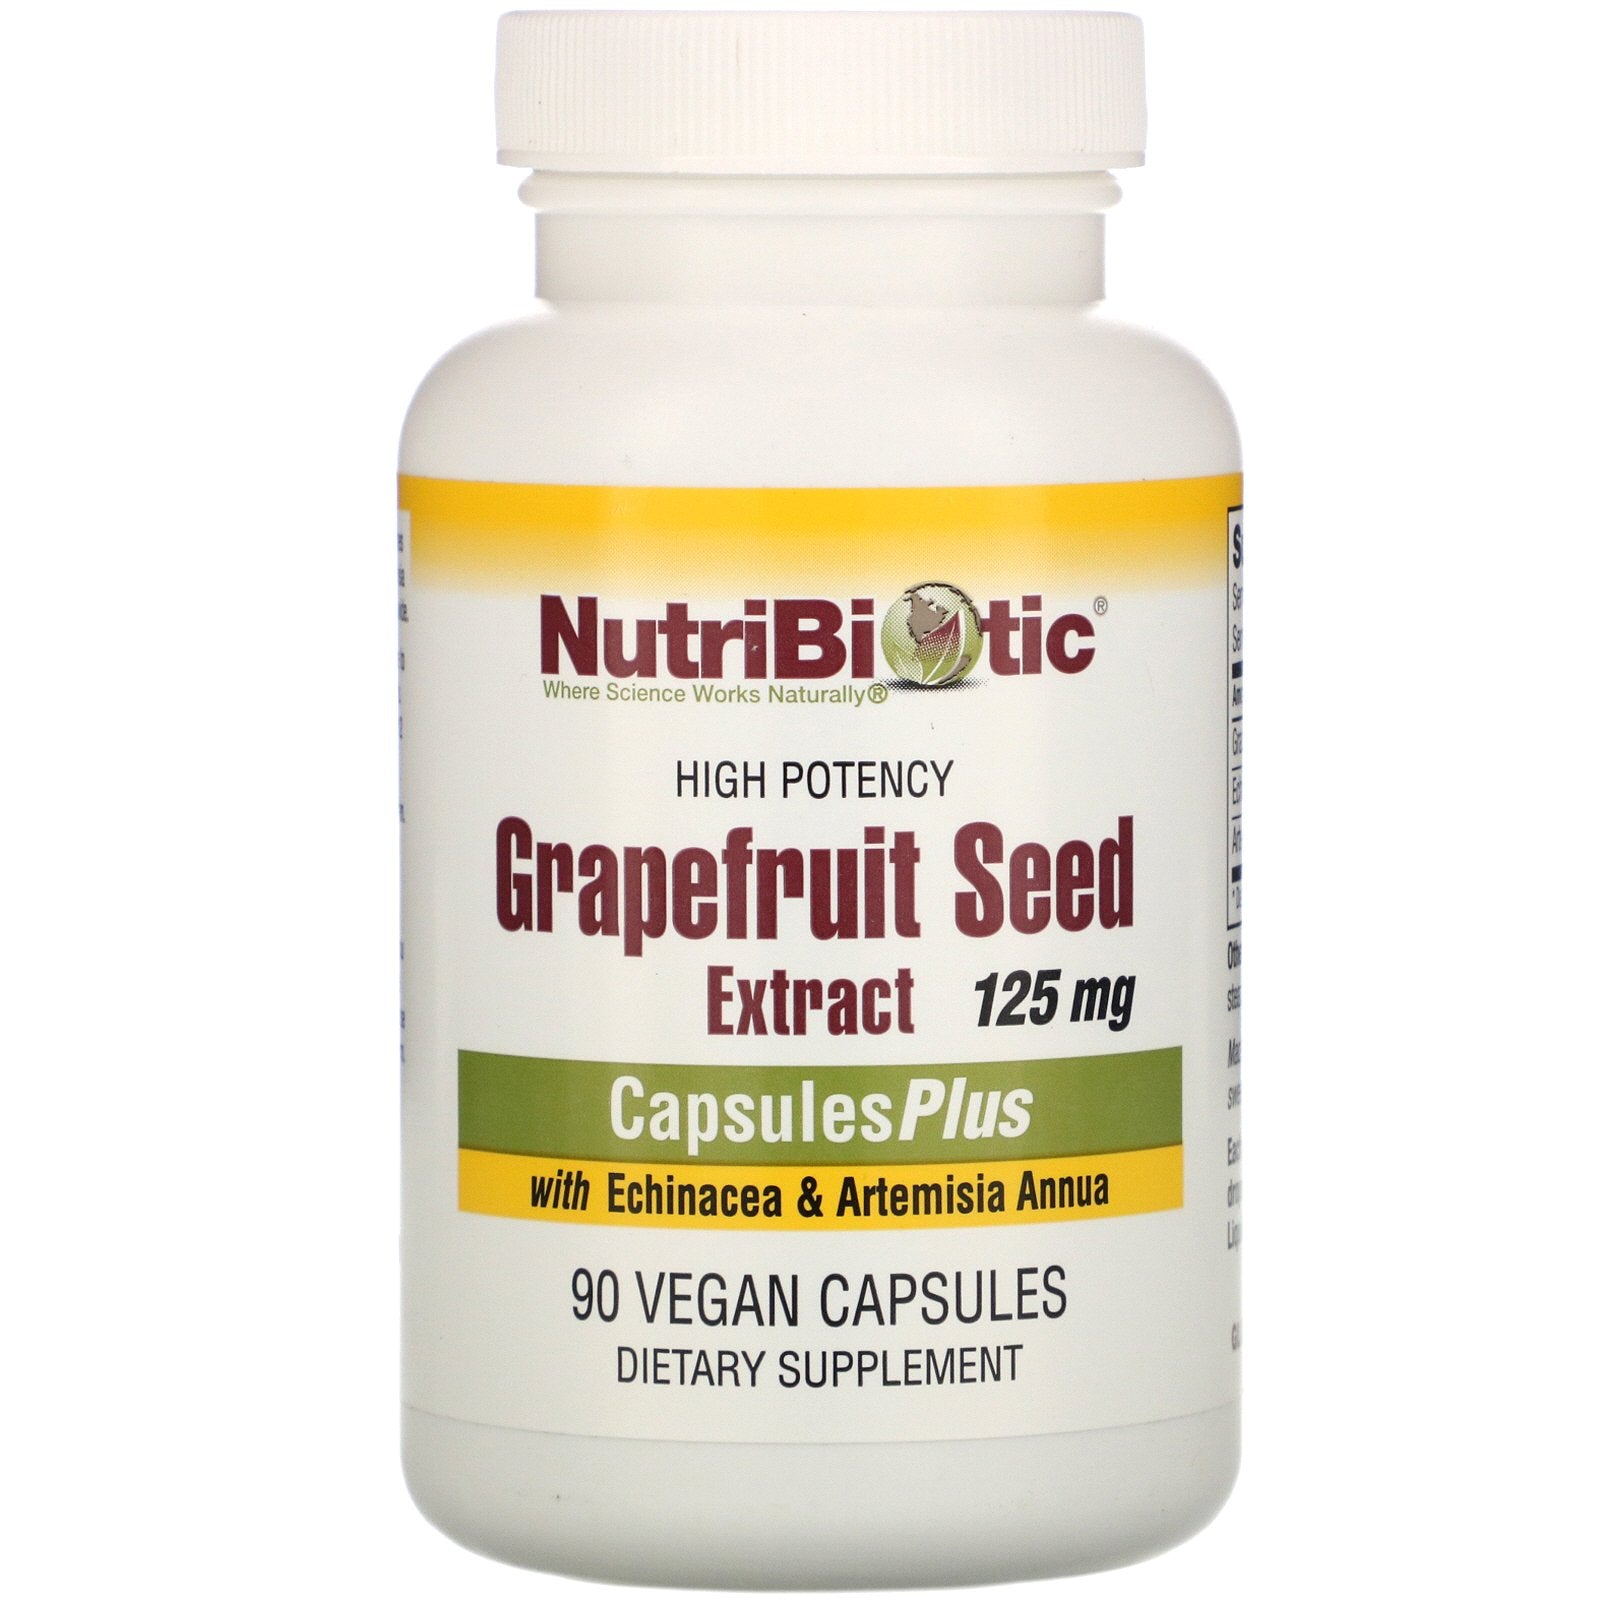 NutriBiotic, Grapefruit Seed Extract with Echinacea & Artemisia Annua, High Potency, 125 mg Vegan Capsules